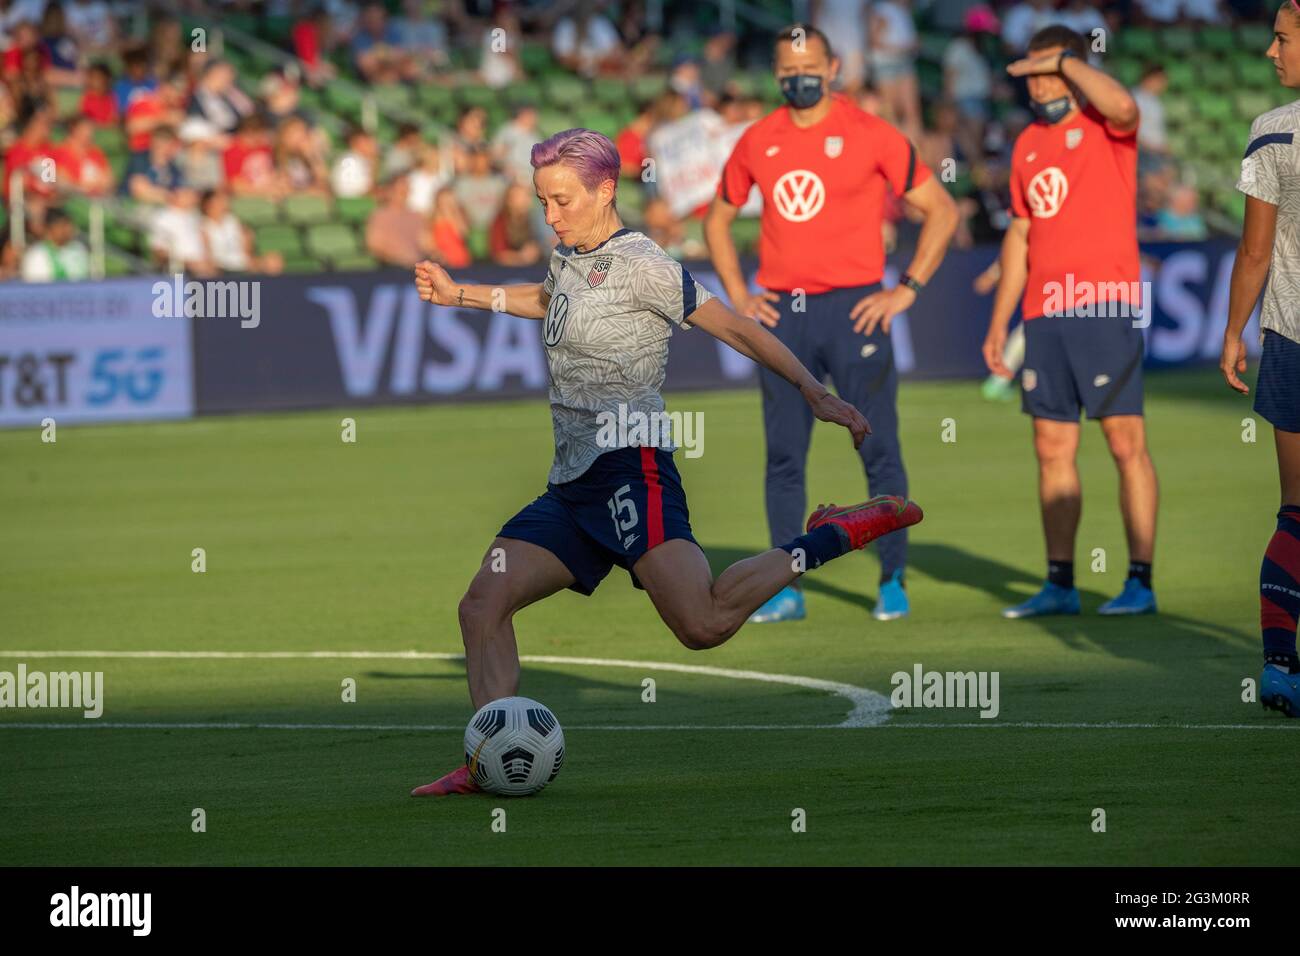 Austin, Texas, USA, June 16 2021: Forward MEGAN RAPINOE takes pre-match warmup kicks in the early evening light before the US Women's National Team (USWNT) beats Nigeria, 2-0 in the inaugural match of Austin's new Q2 Stadium. The U.S. women's team, an Olympic favorite, is wrapping up a series of summer matches to prep for the Tokyo Games. Credit: Bob Daemmrich/Alamy Live News Stock Photo